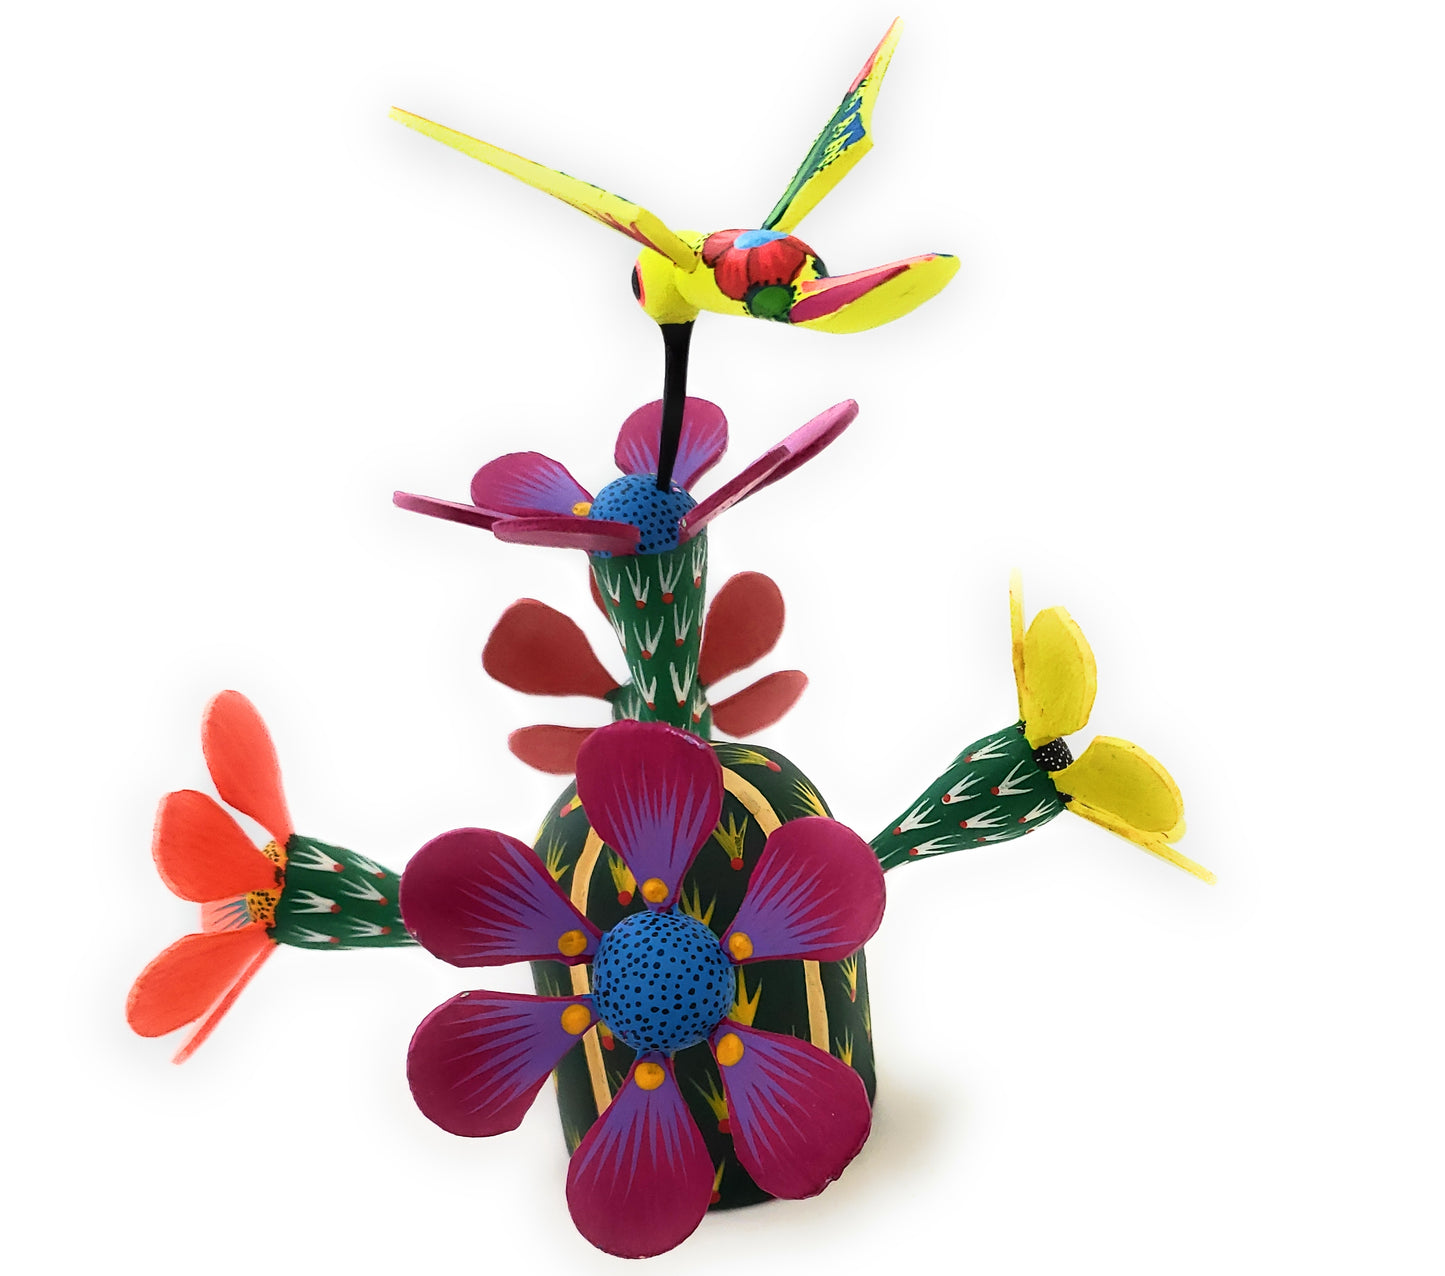 Mexican Cactus Alebrije Oaxacan Wood Carving Small